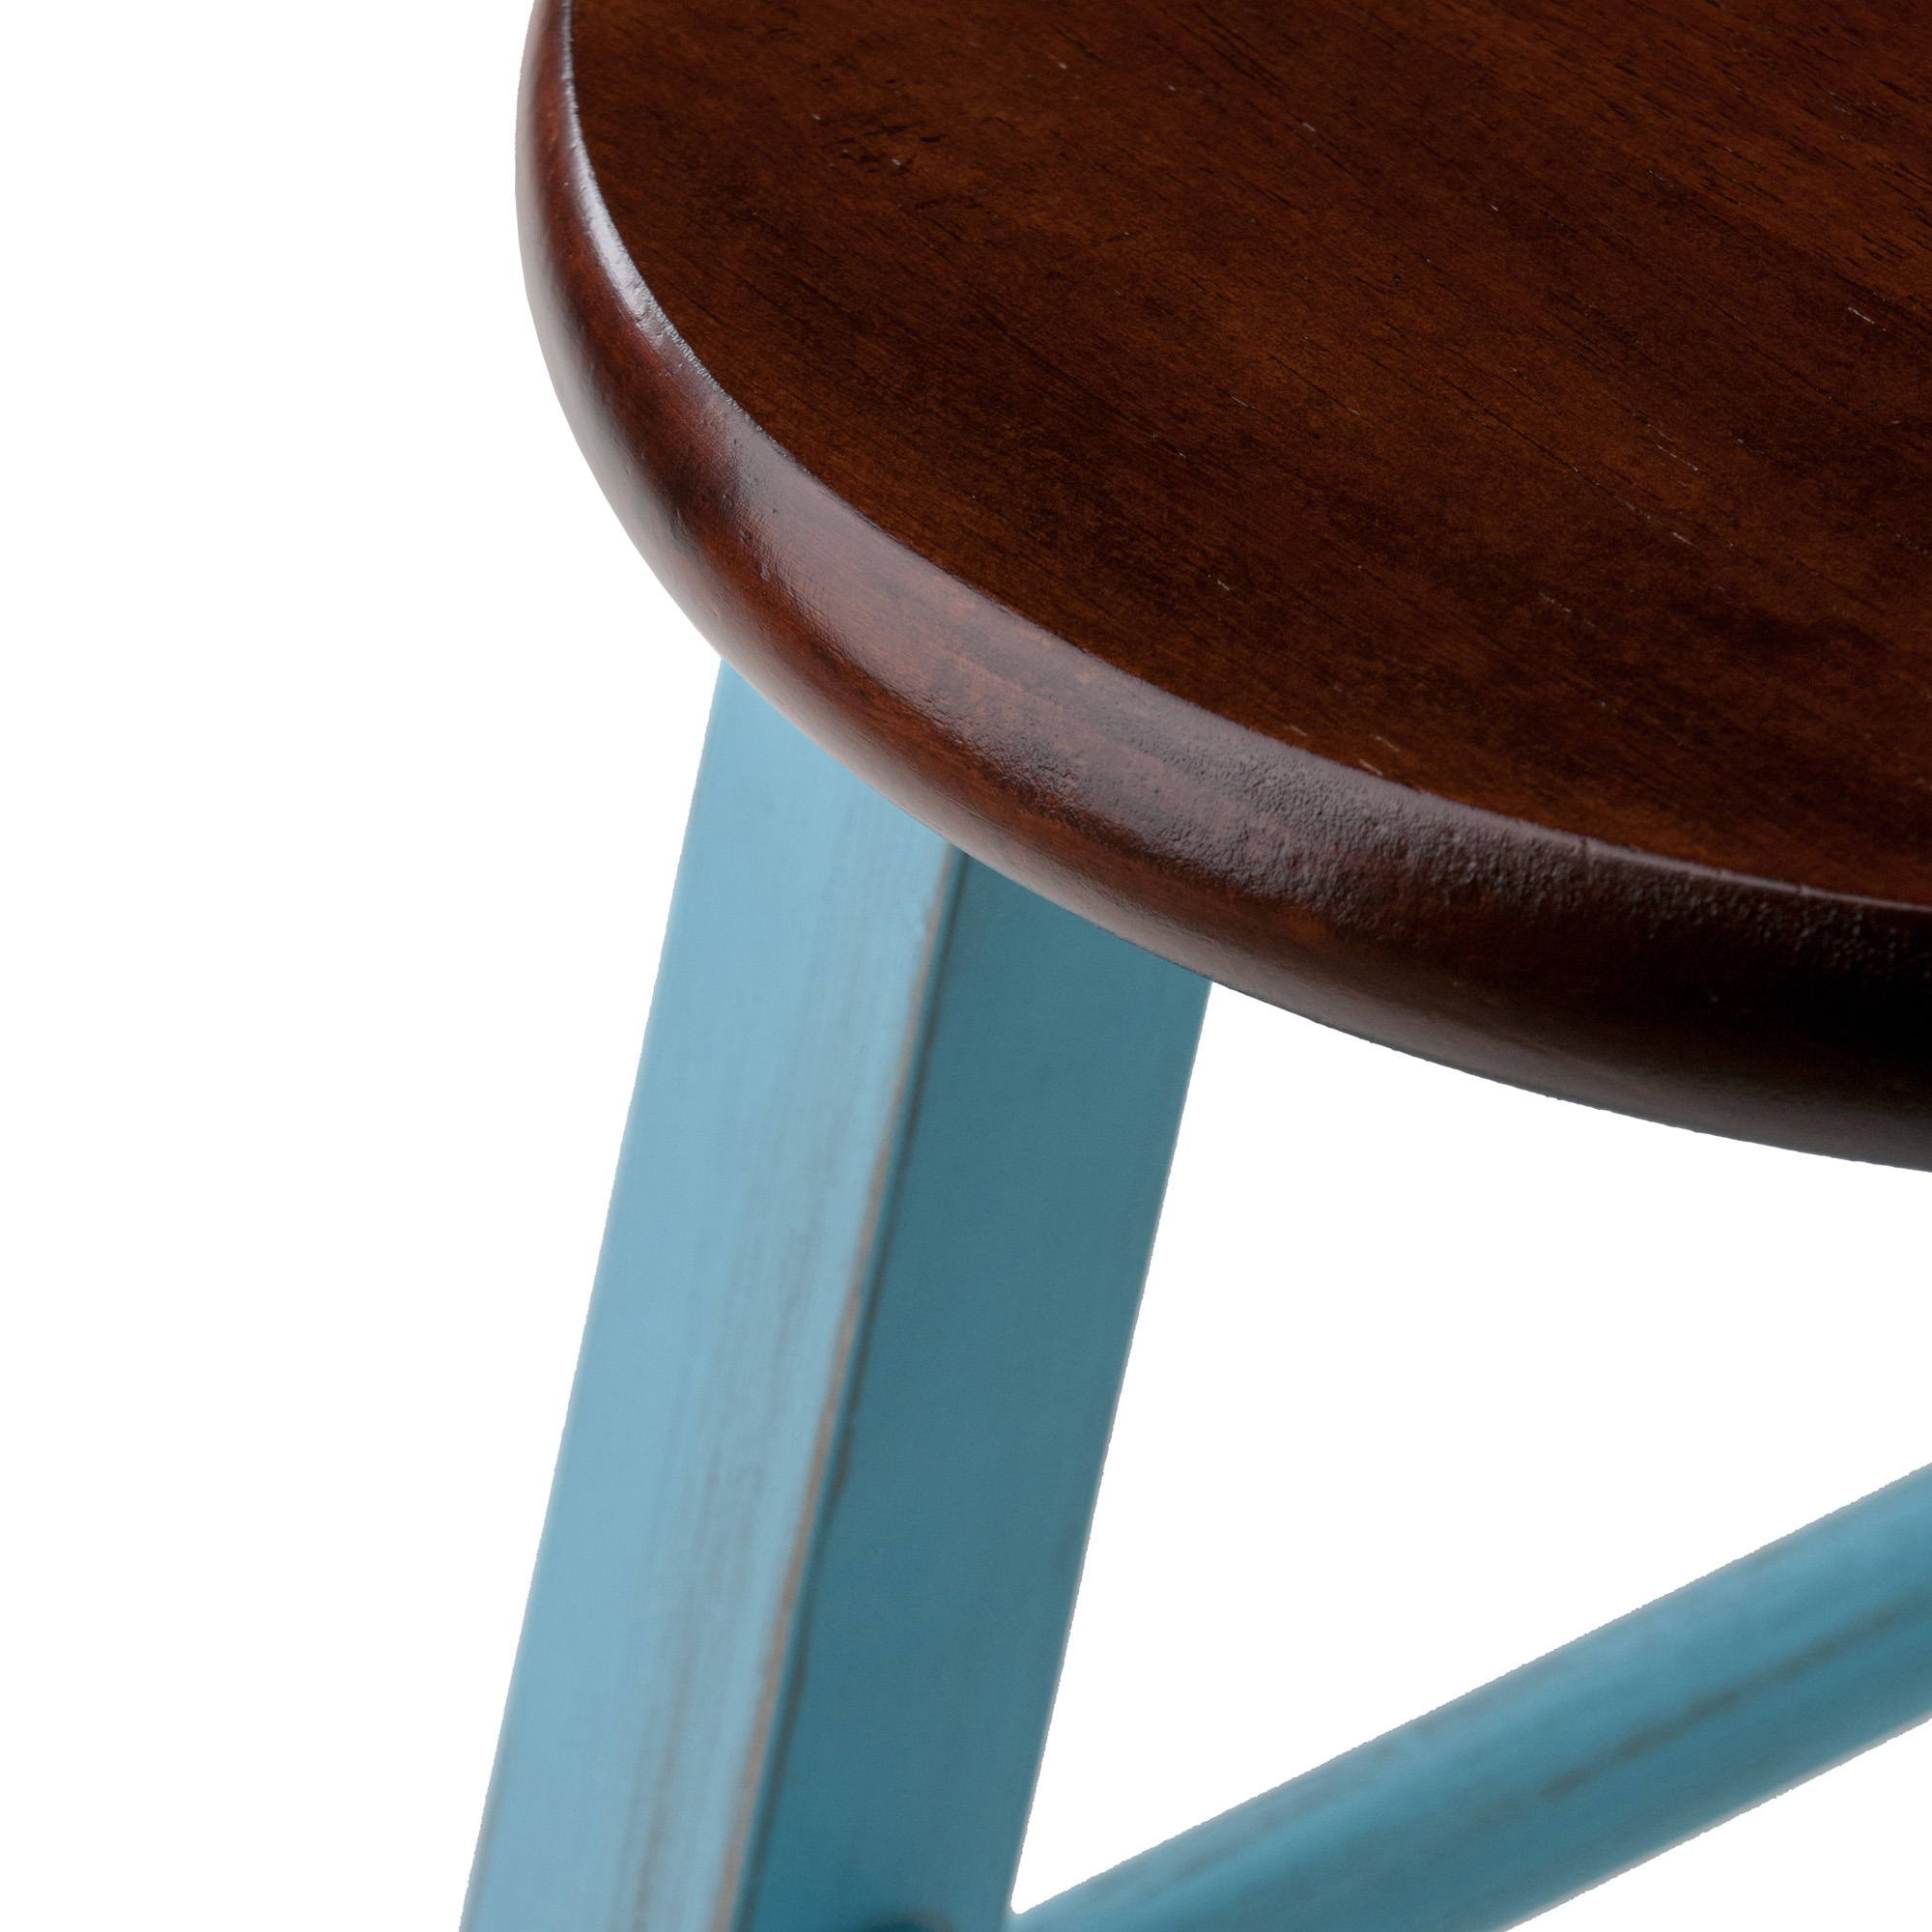 Winsome Wood Ivy 24" Counter Stool, Rustic Light Blue & Walnut Finish - image 2 of 6